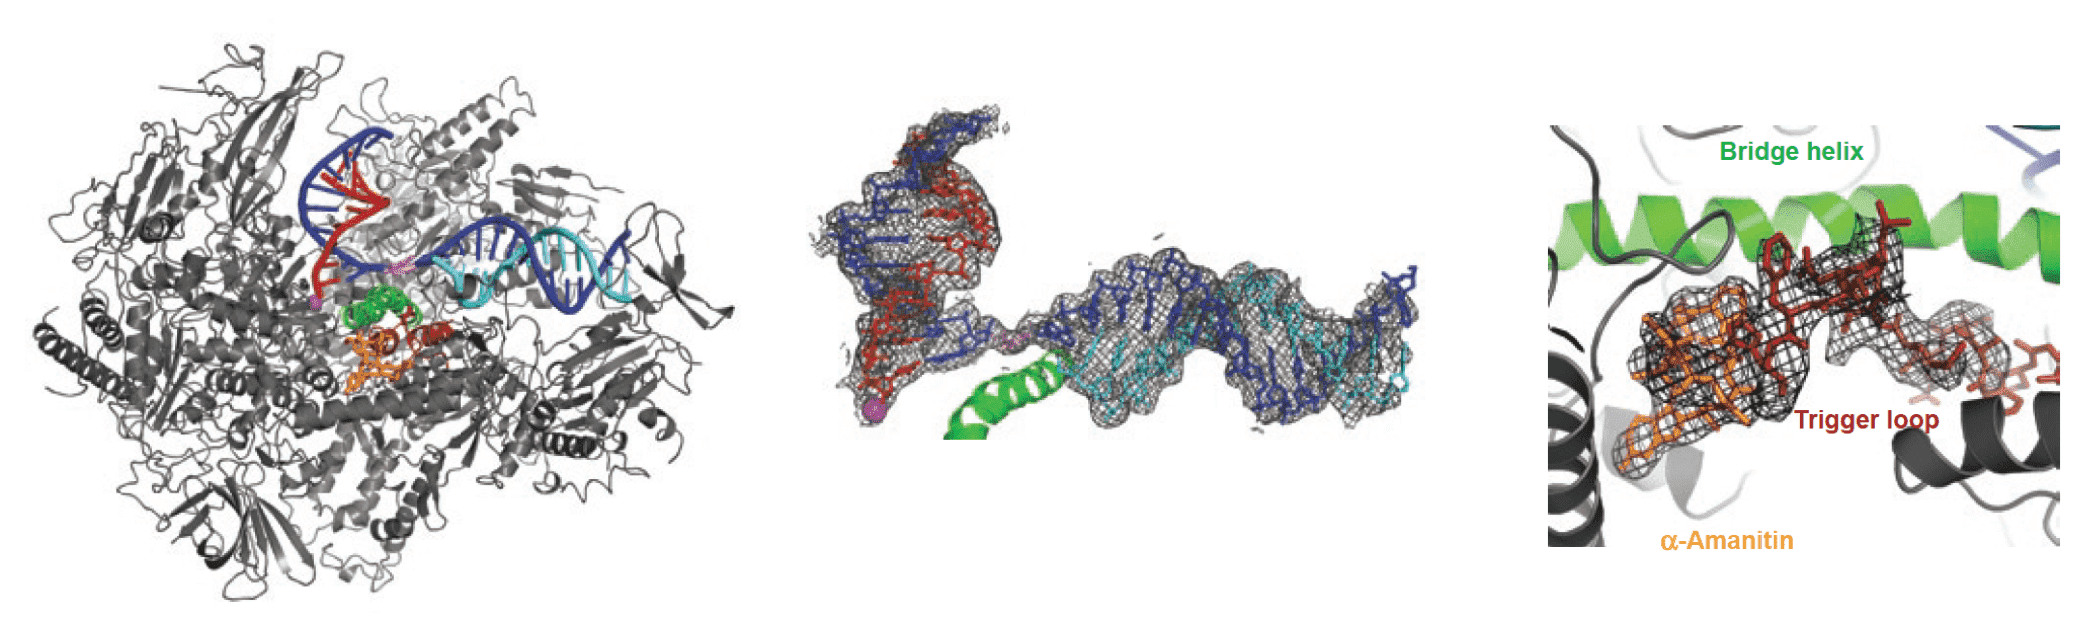  Amatoxin interaction with RNA-polymerase II. Overall crystal structure of α-amanitin with RNA polymerase II (left) and the amplified view of RNA polymerase II interaction with nucleic acids (middle) and α-amanitin (right) (Nat. Struct. Mol. Biol., 2008).